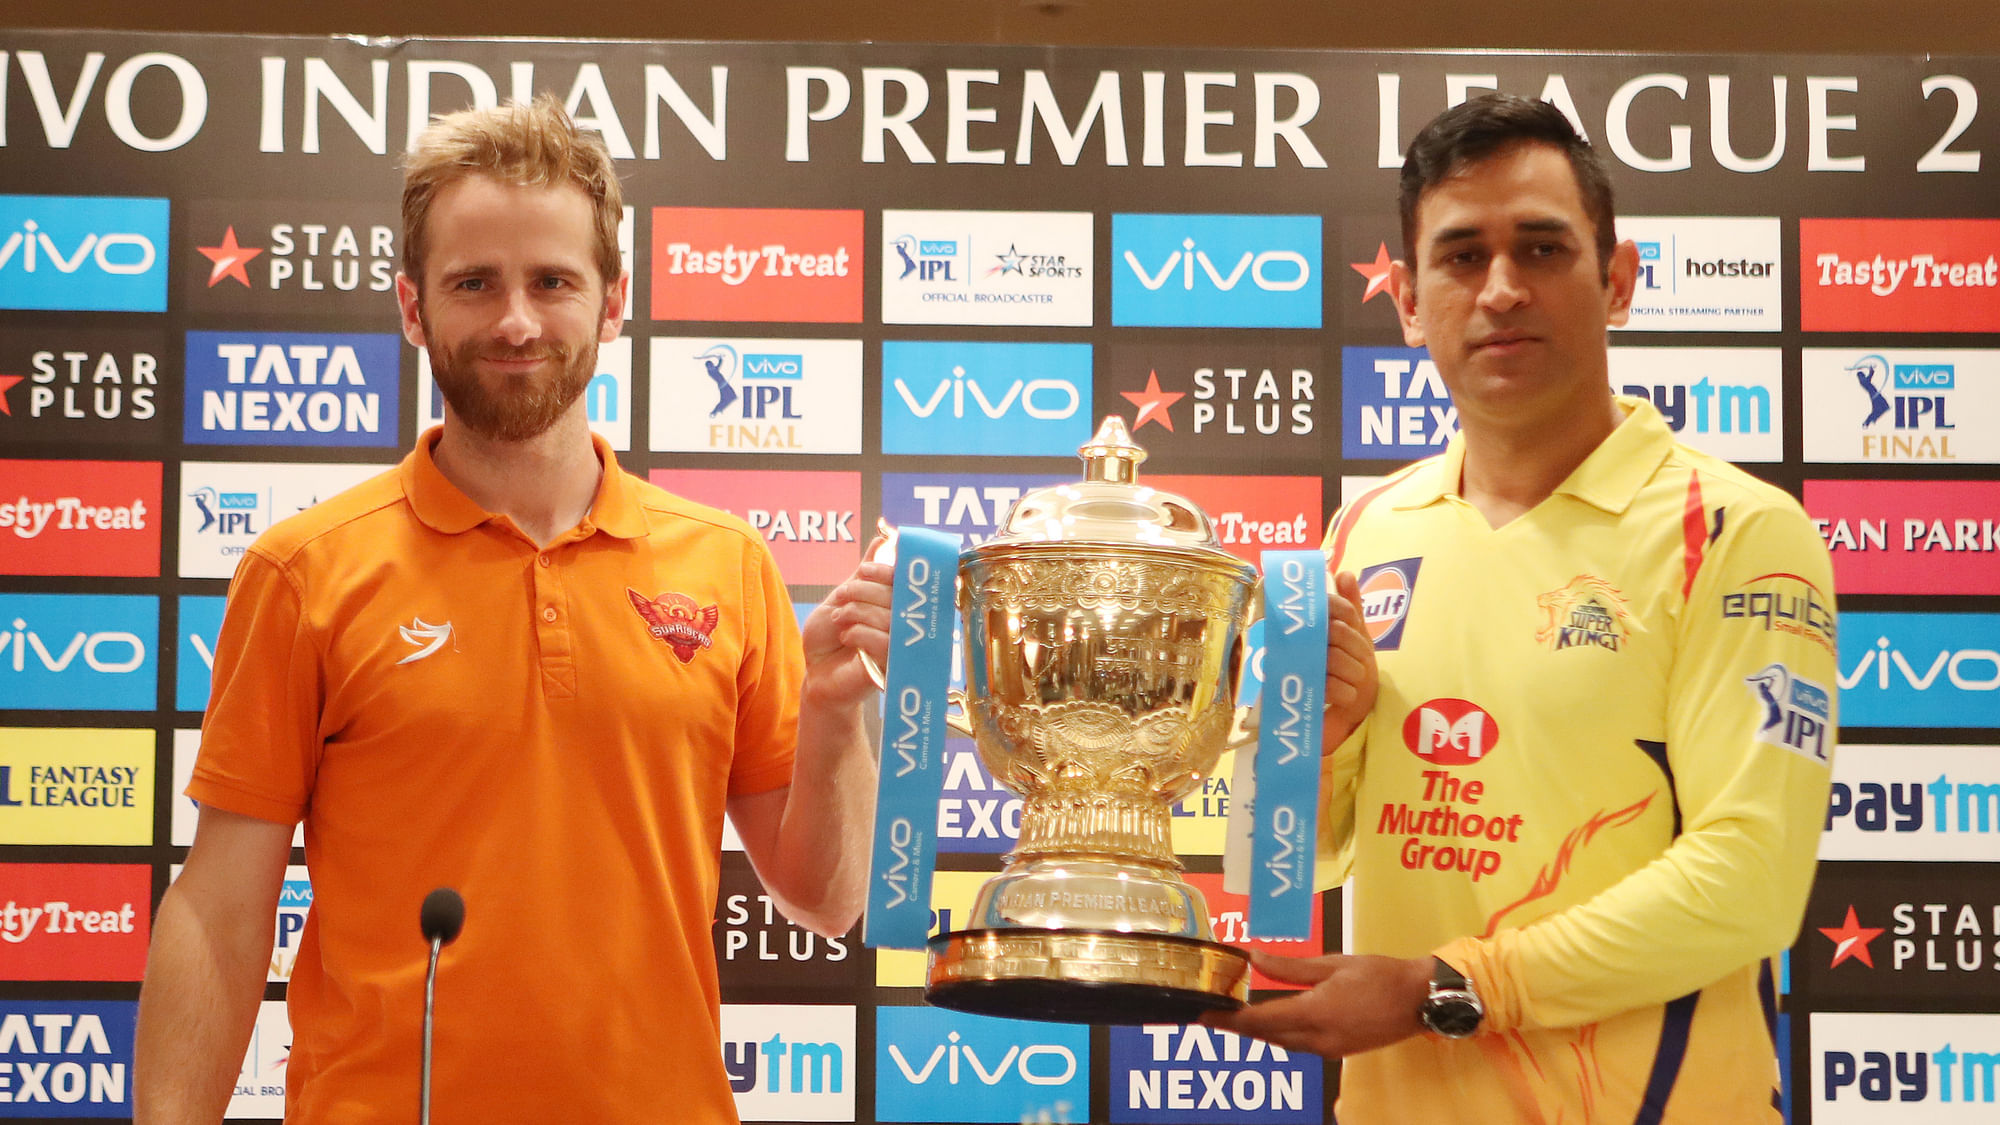 Kane Williamson of the Sunrisers Hyderabad and MS Dhoni of the Chennai Super Kings address the media during the Vivo Indian Premier League 2018 (IPL 2018) pre-final press conference held at the Trident Hotel in Mumbai on the 26th May 2018.